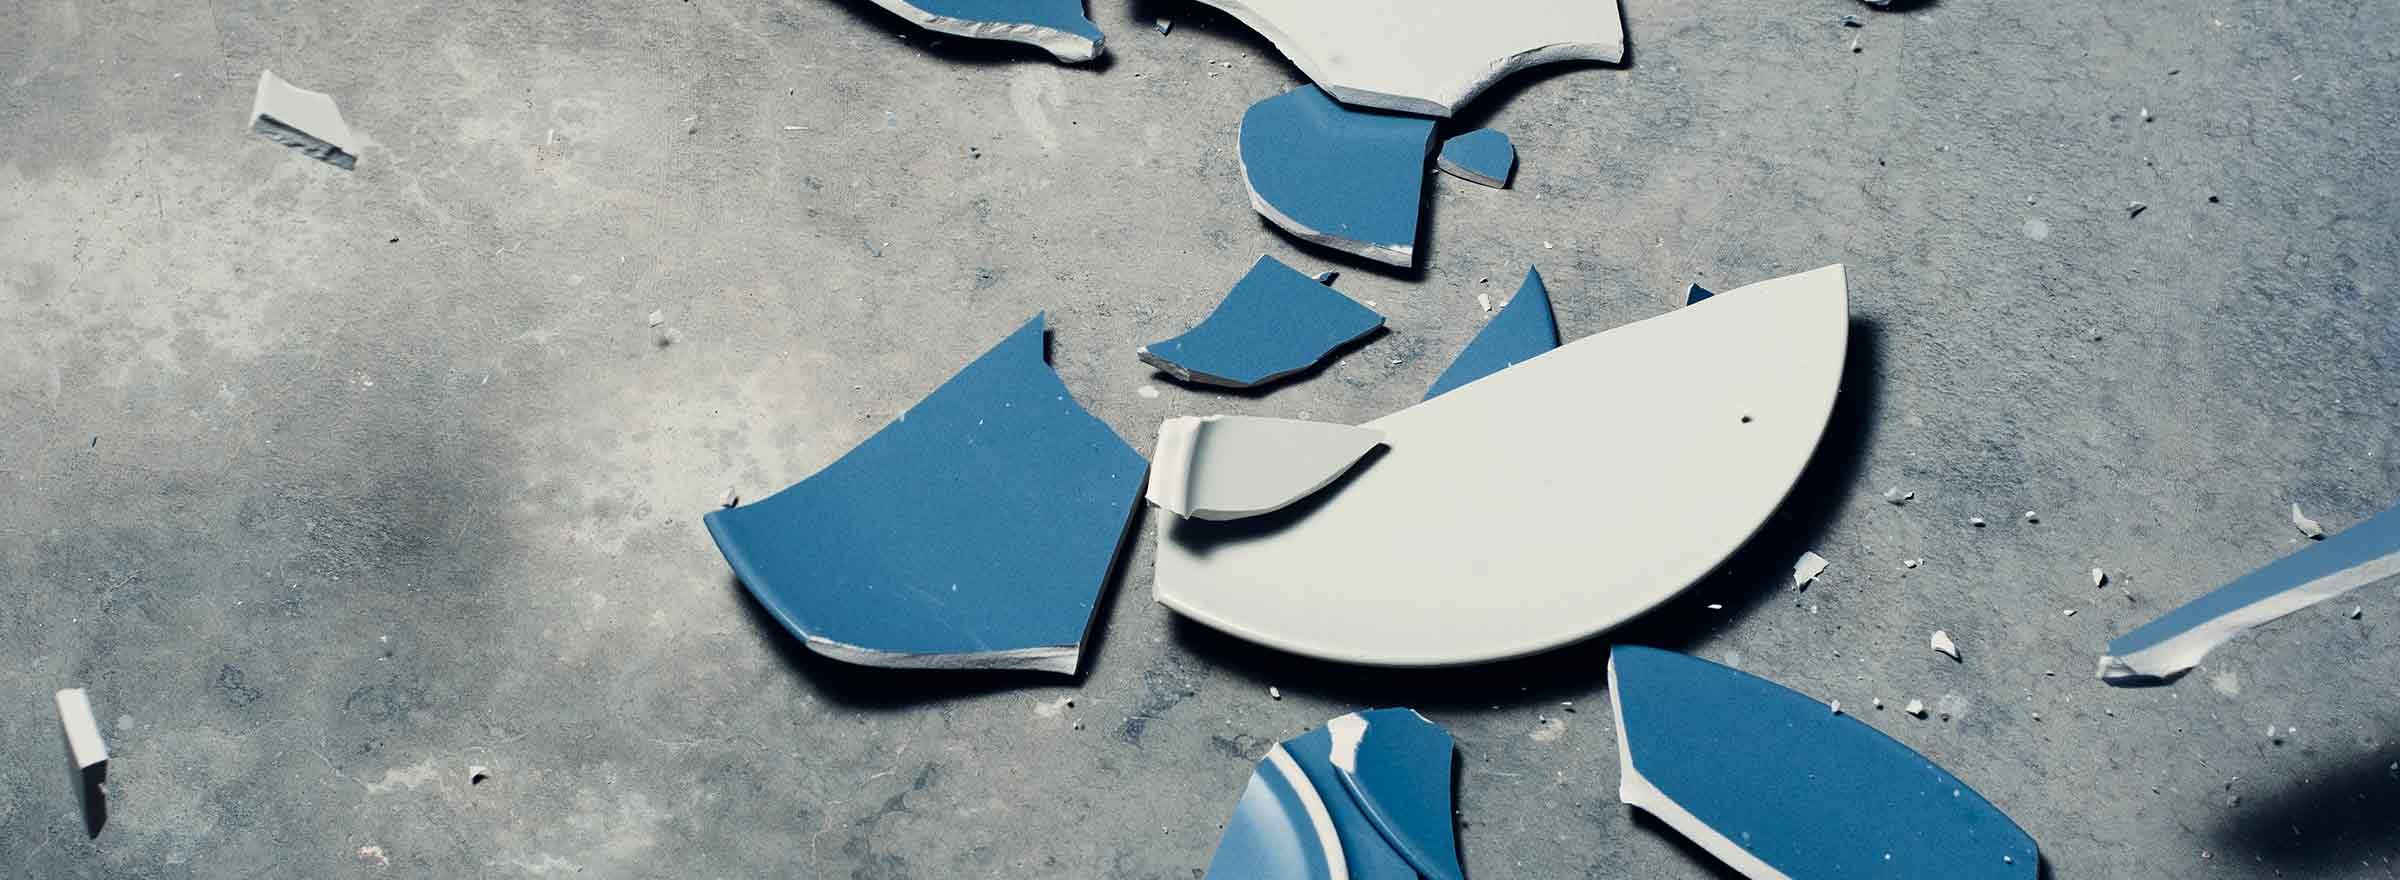 broken dishes on the floor, symbolizing how one nonprofit uses dell computers to fight domestic abuse